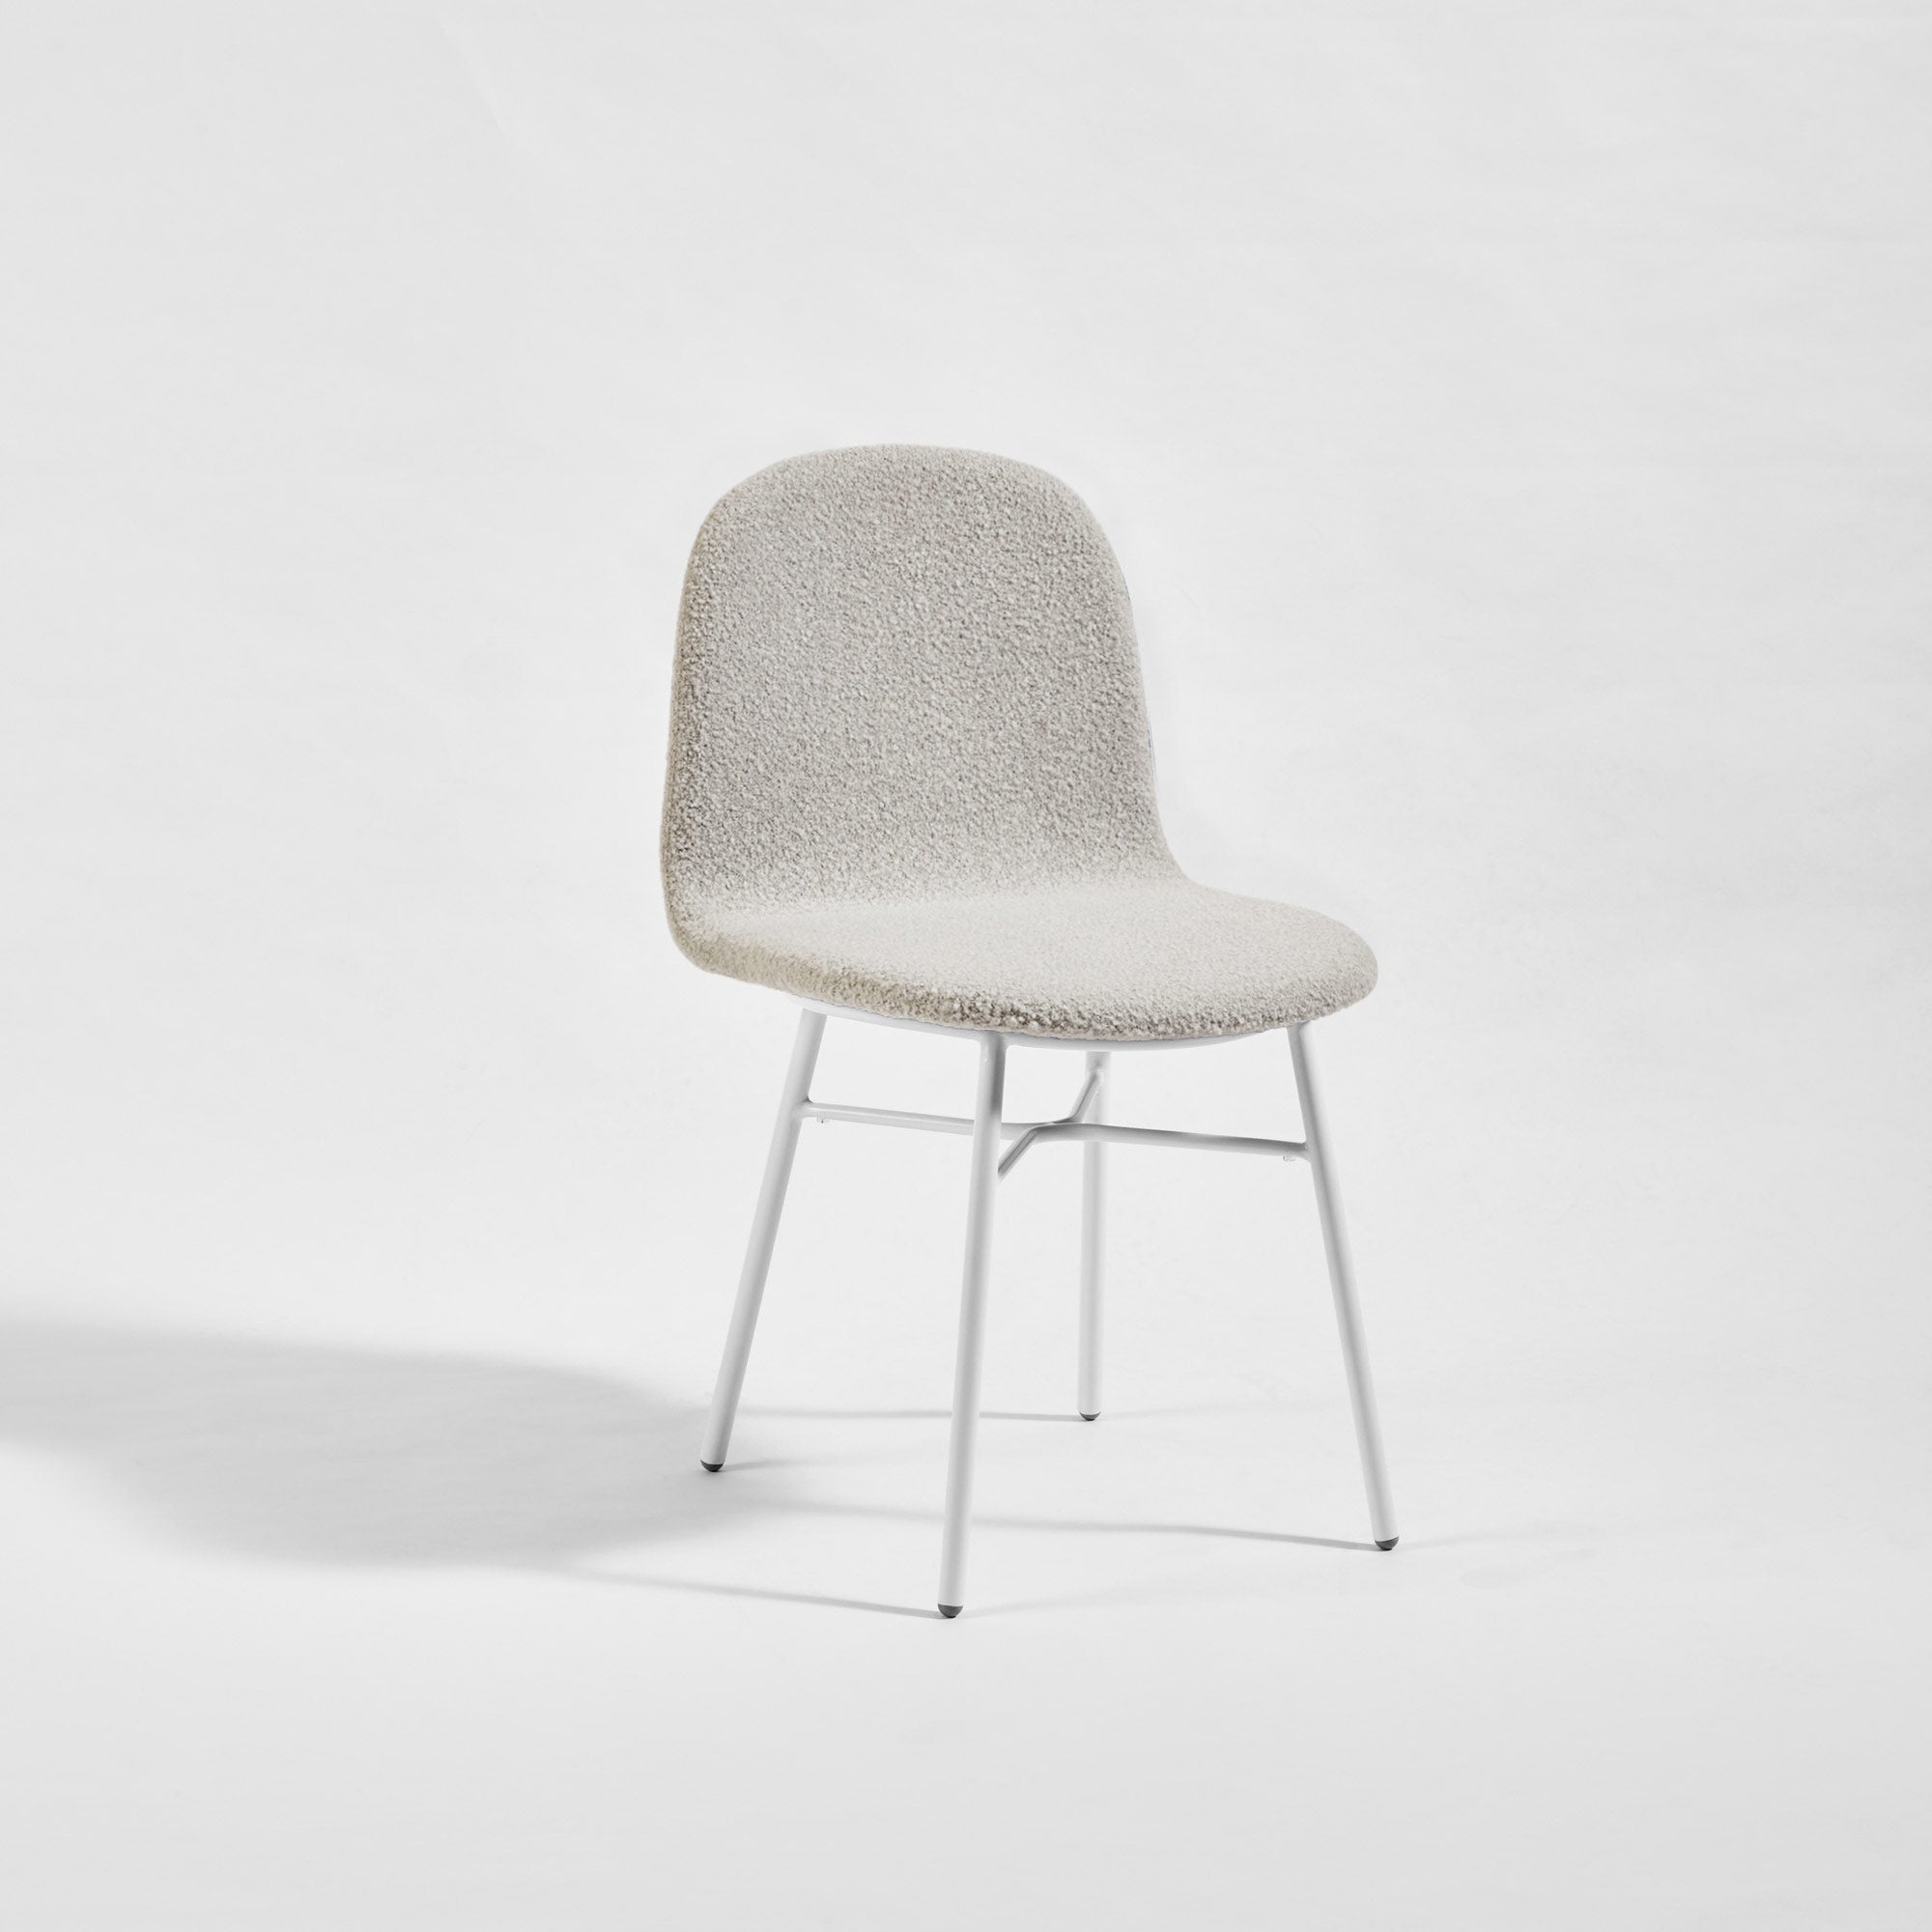 Potato Chair | Timber & Upholstered Dining Office Chair with Handle | GibsonKarlo | DesignByThem ** HF5 Elle - 0230